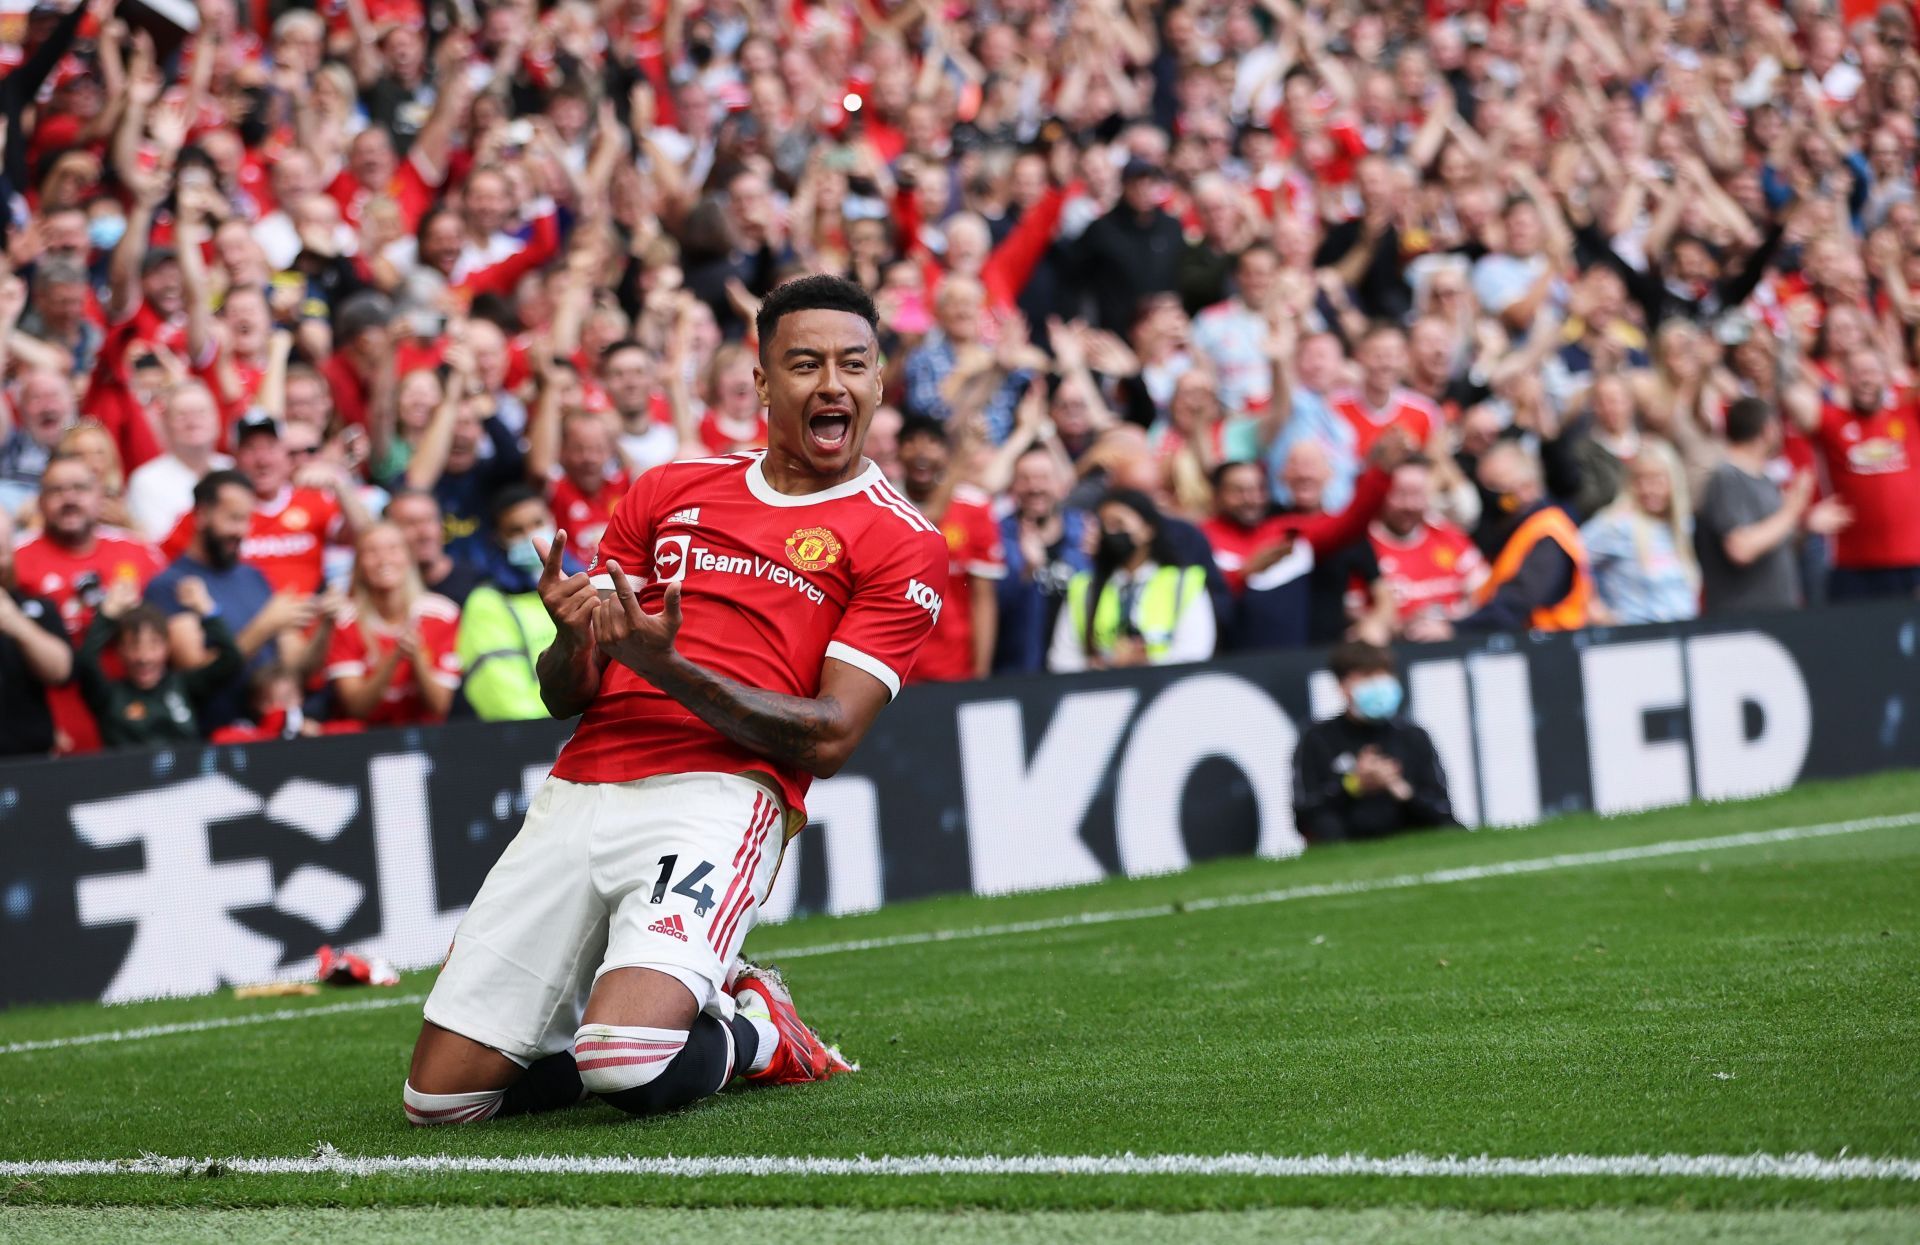 Jesse Lingard has found playing time hard to come by at Manchester United in recent weeks